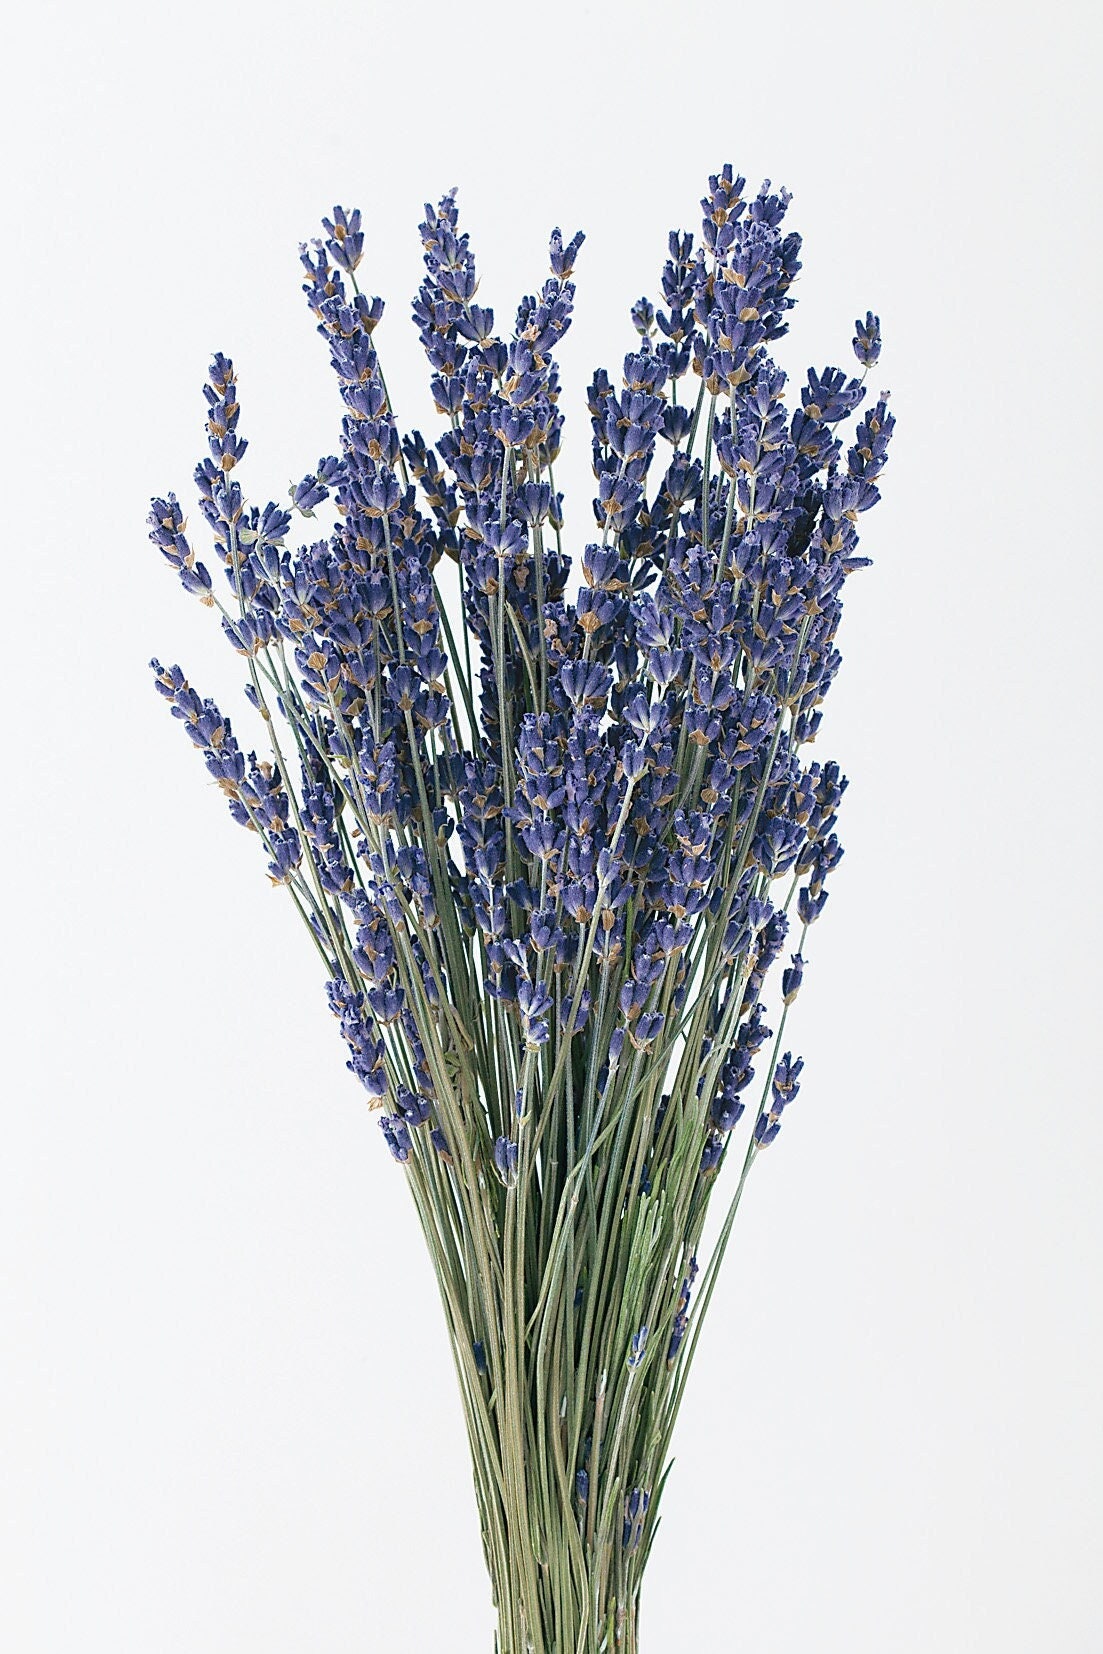 White Vase with Lavander on Mirror and Stoun Wall Background. Colorful  Summer Bouquet of Purple Lavender and Dried Flowers Stock Photo - Image of  decor, board: 265439790